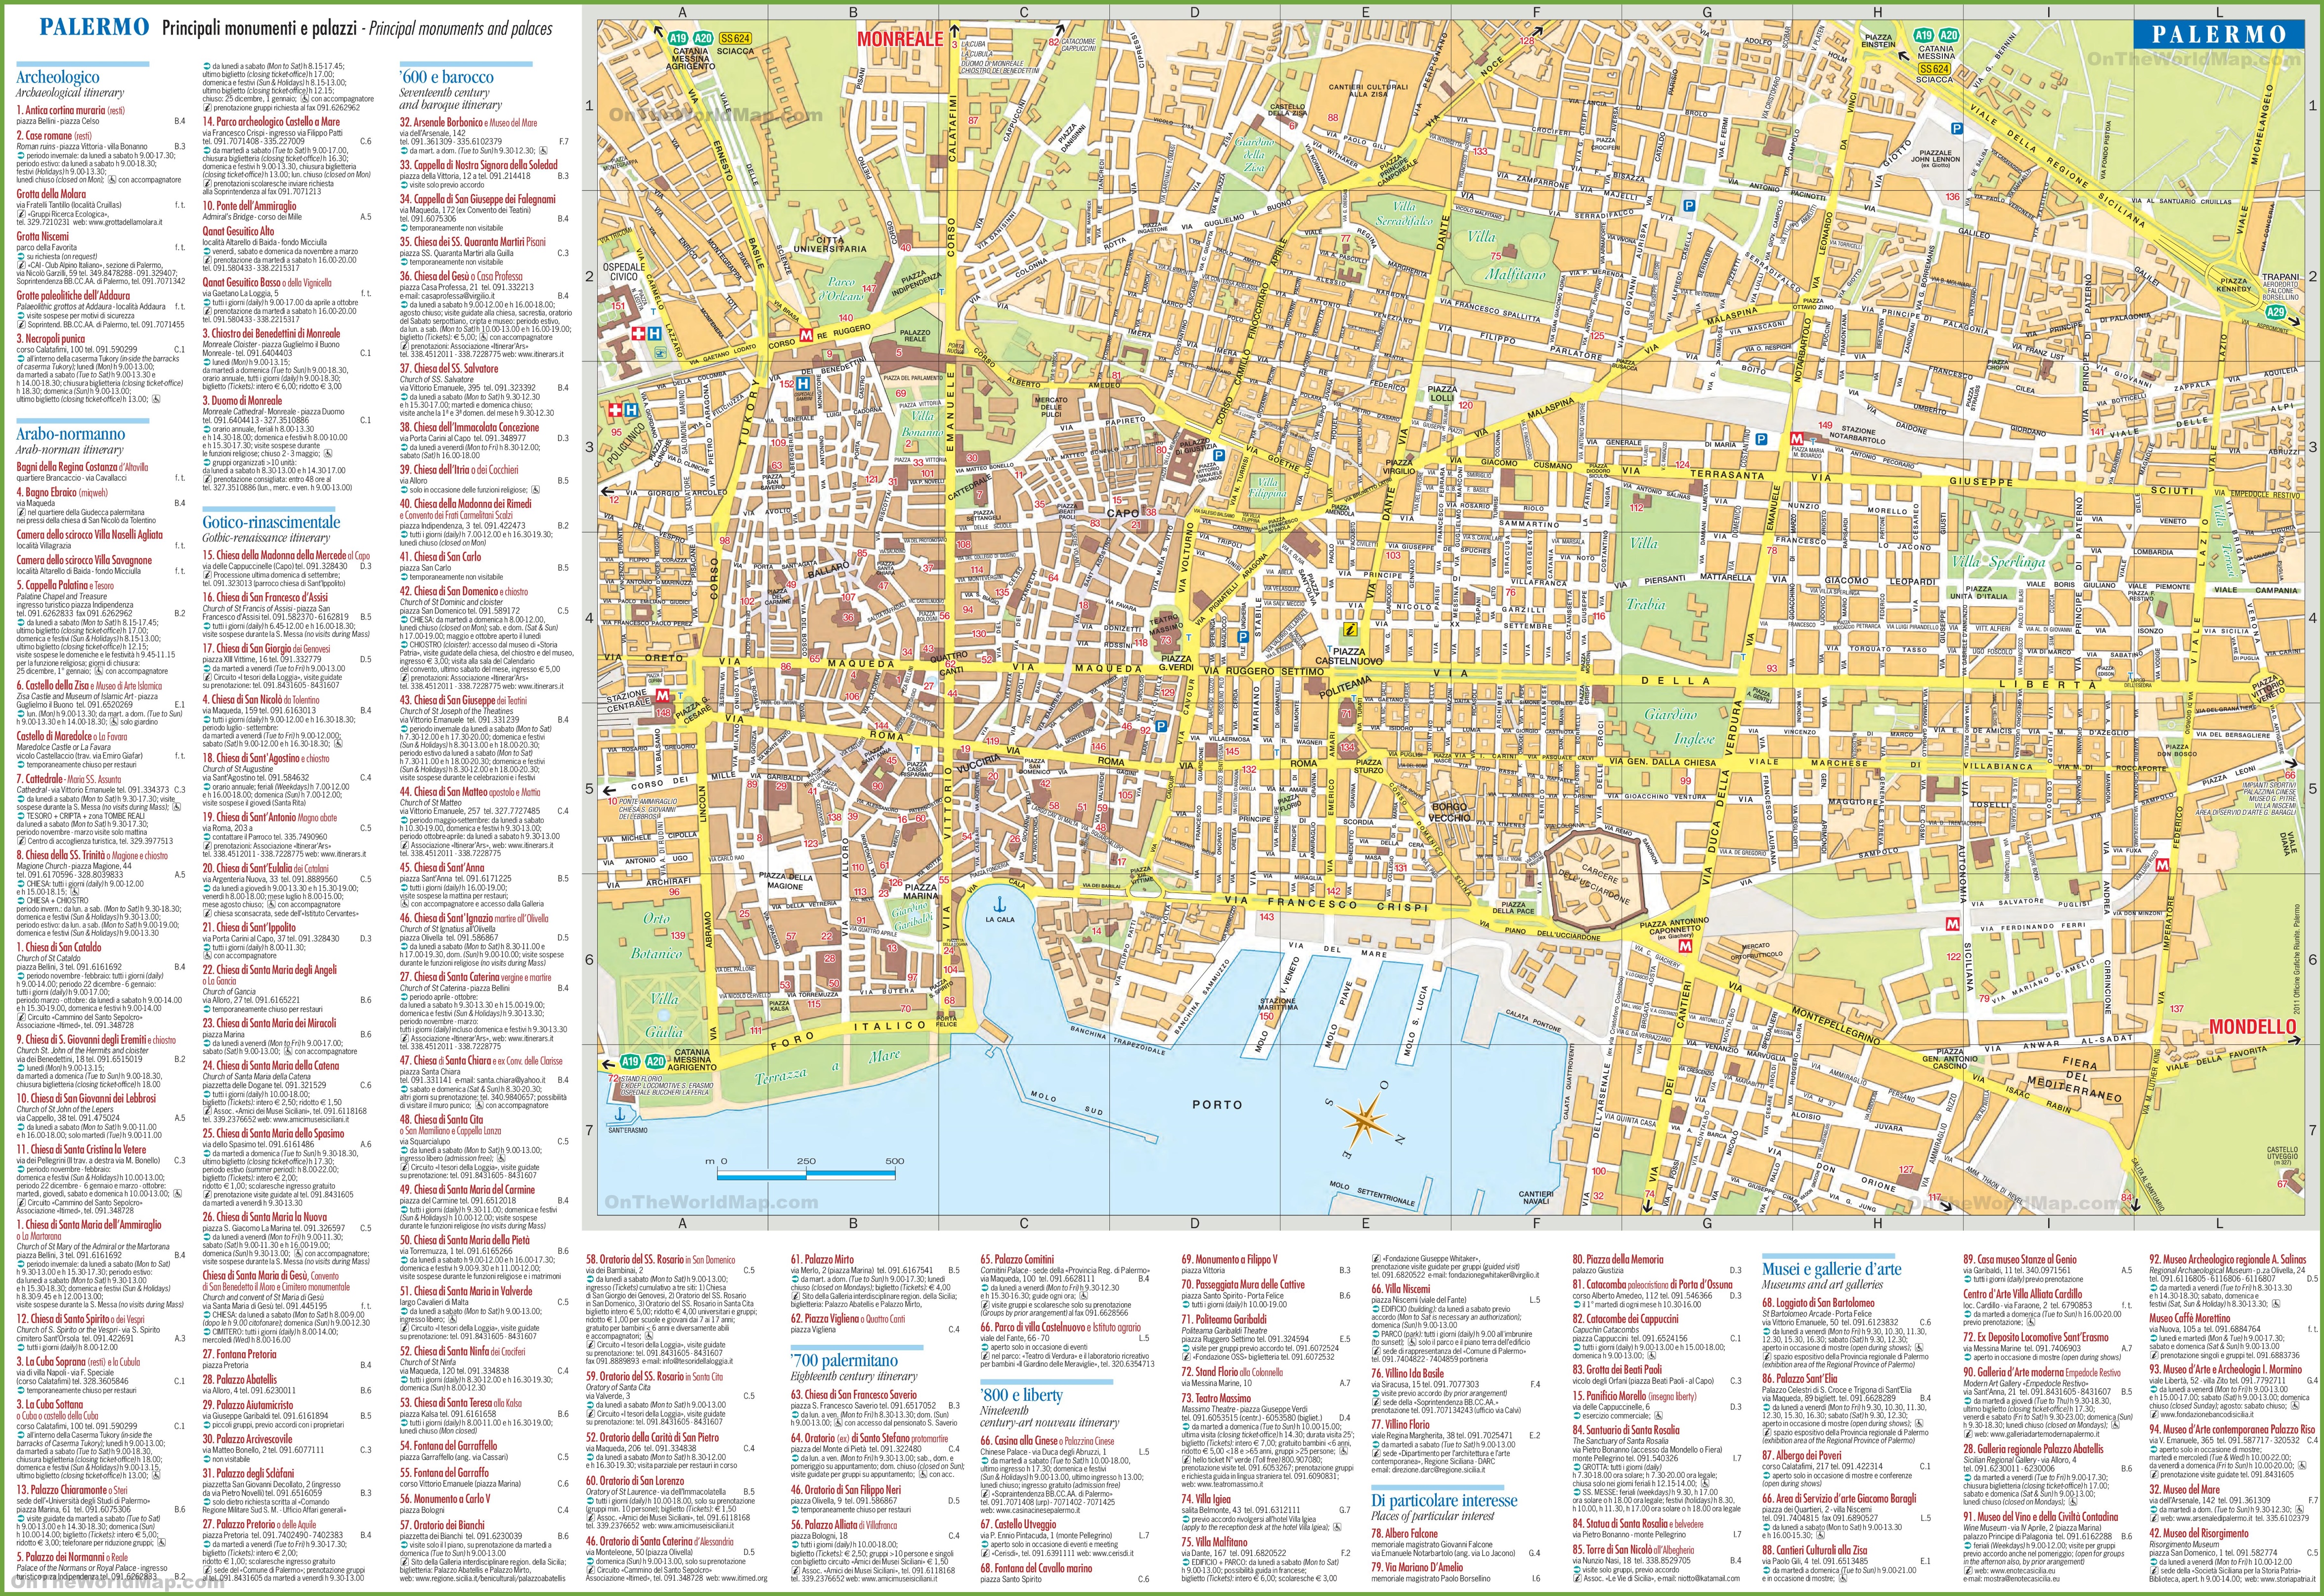 palermo-tourist-attractions-map.jpg